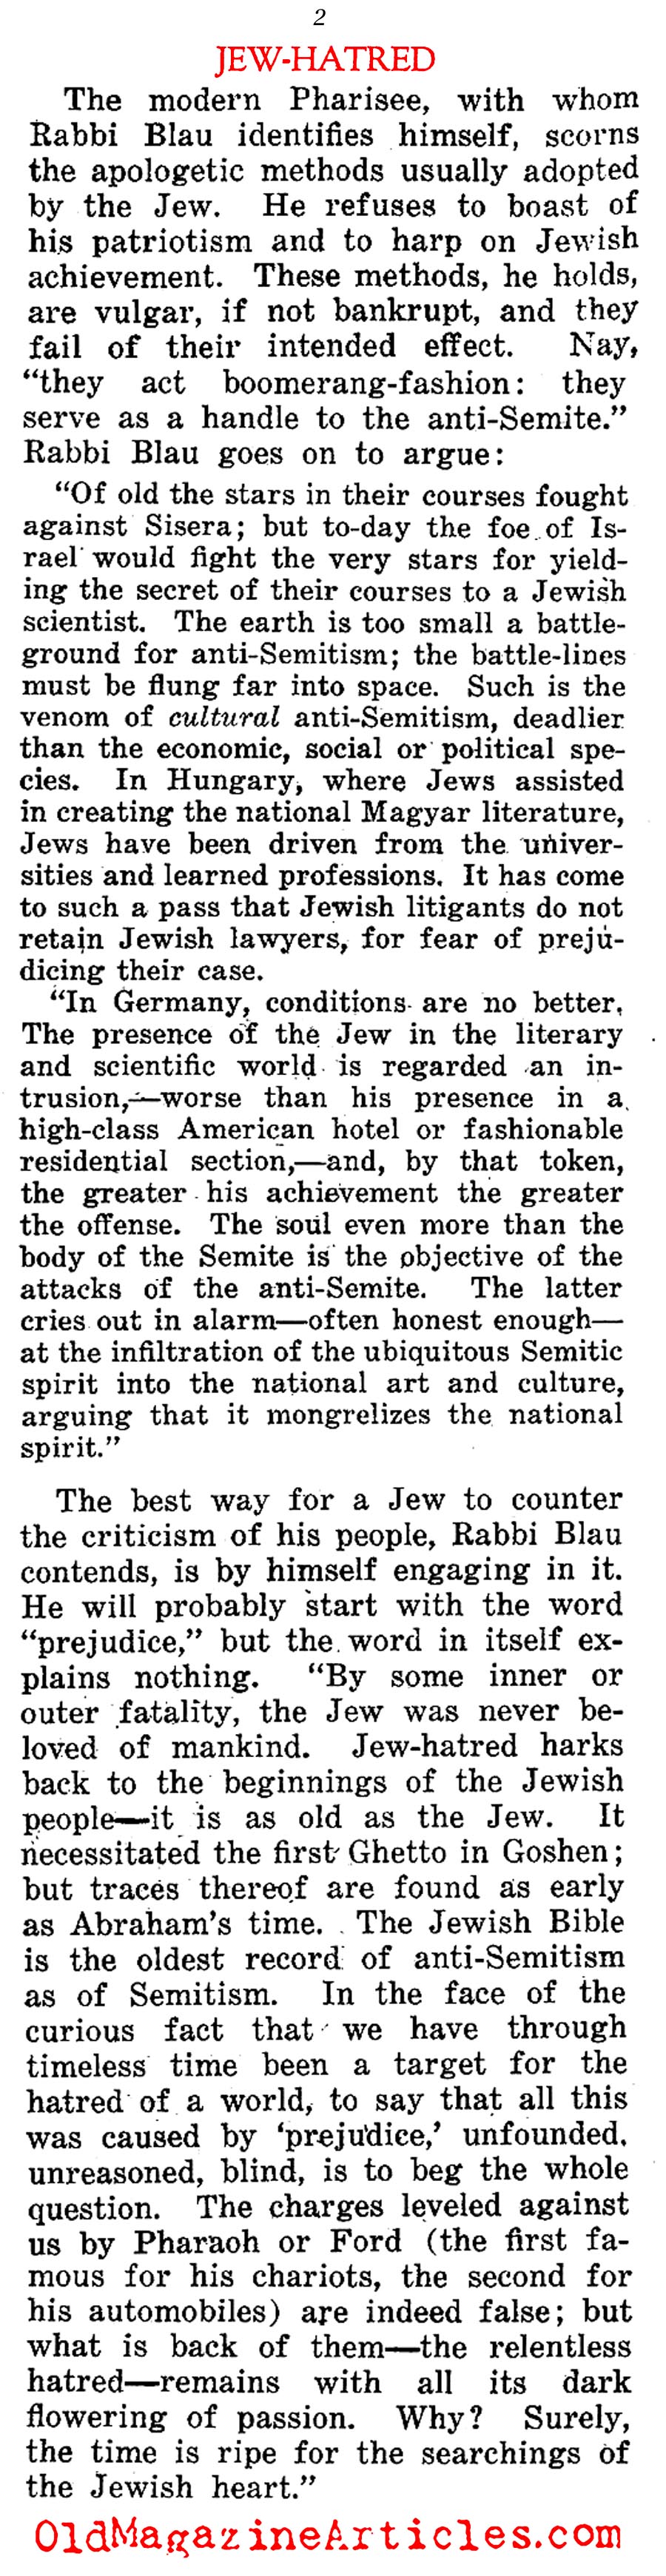 A Zionist Explanation of Jew-Hatred (Current Opinion, 1922)